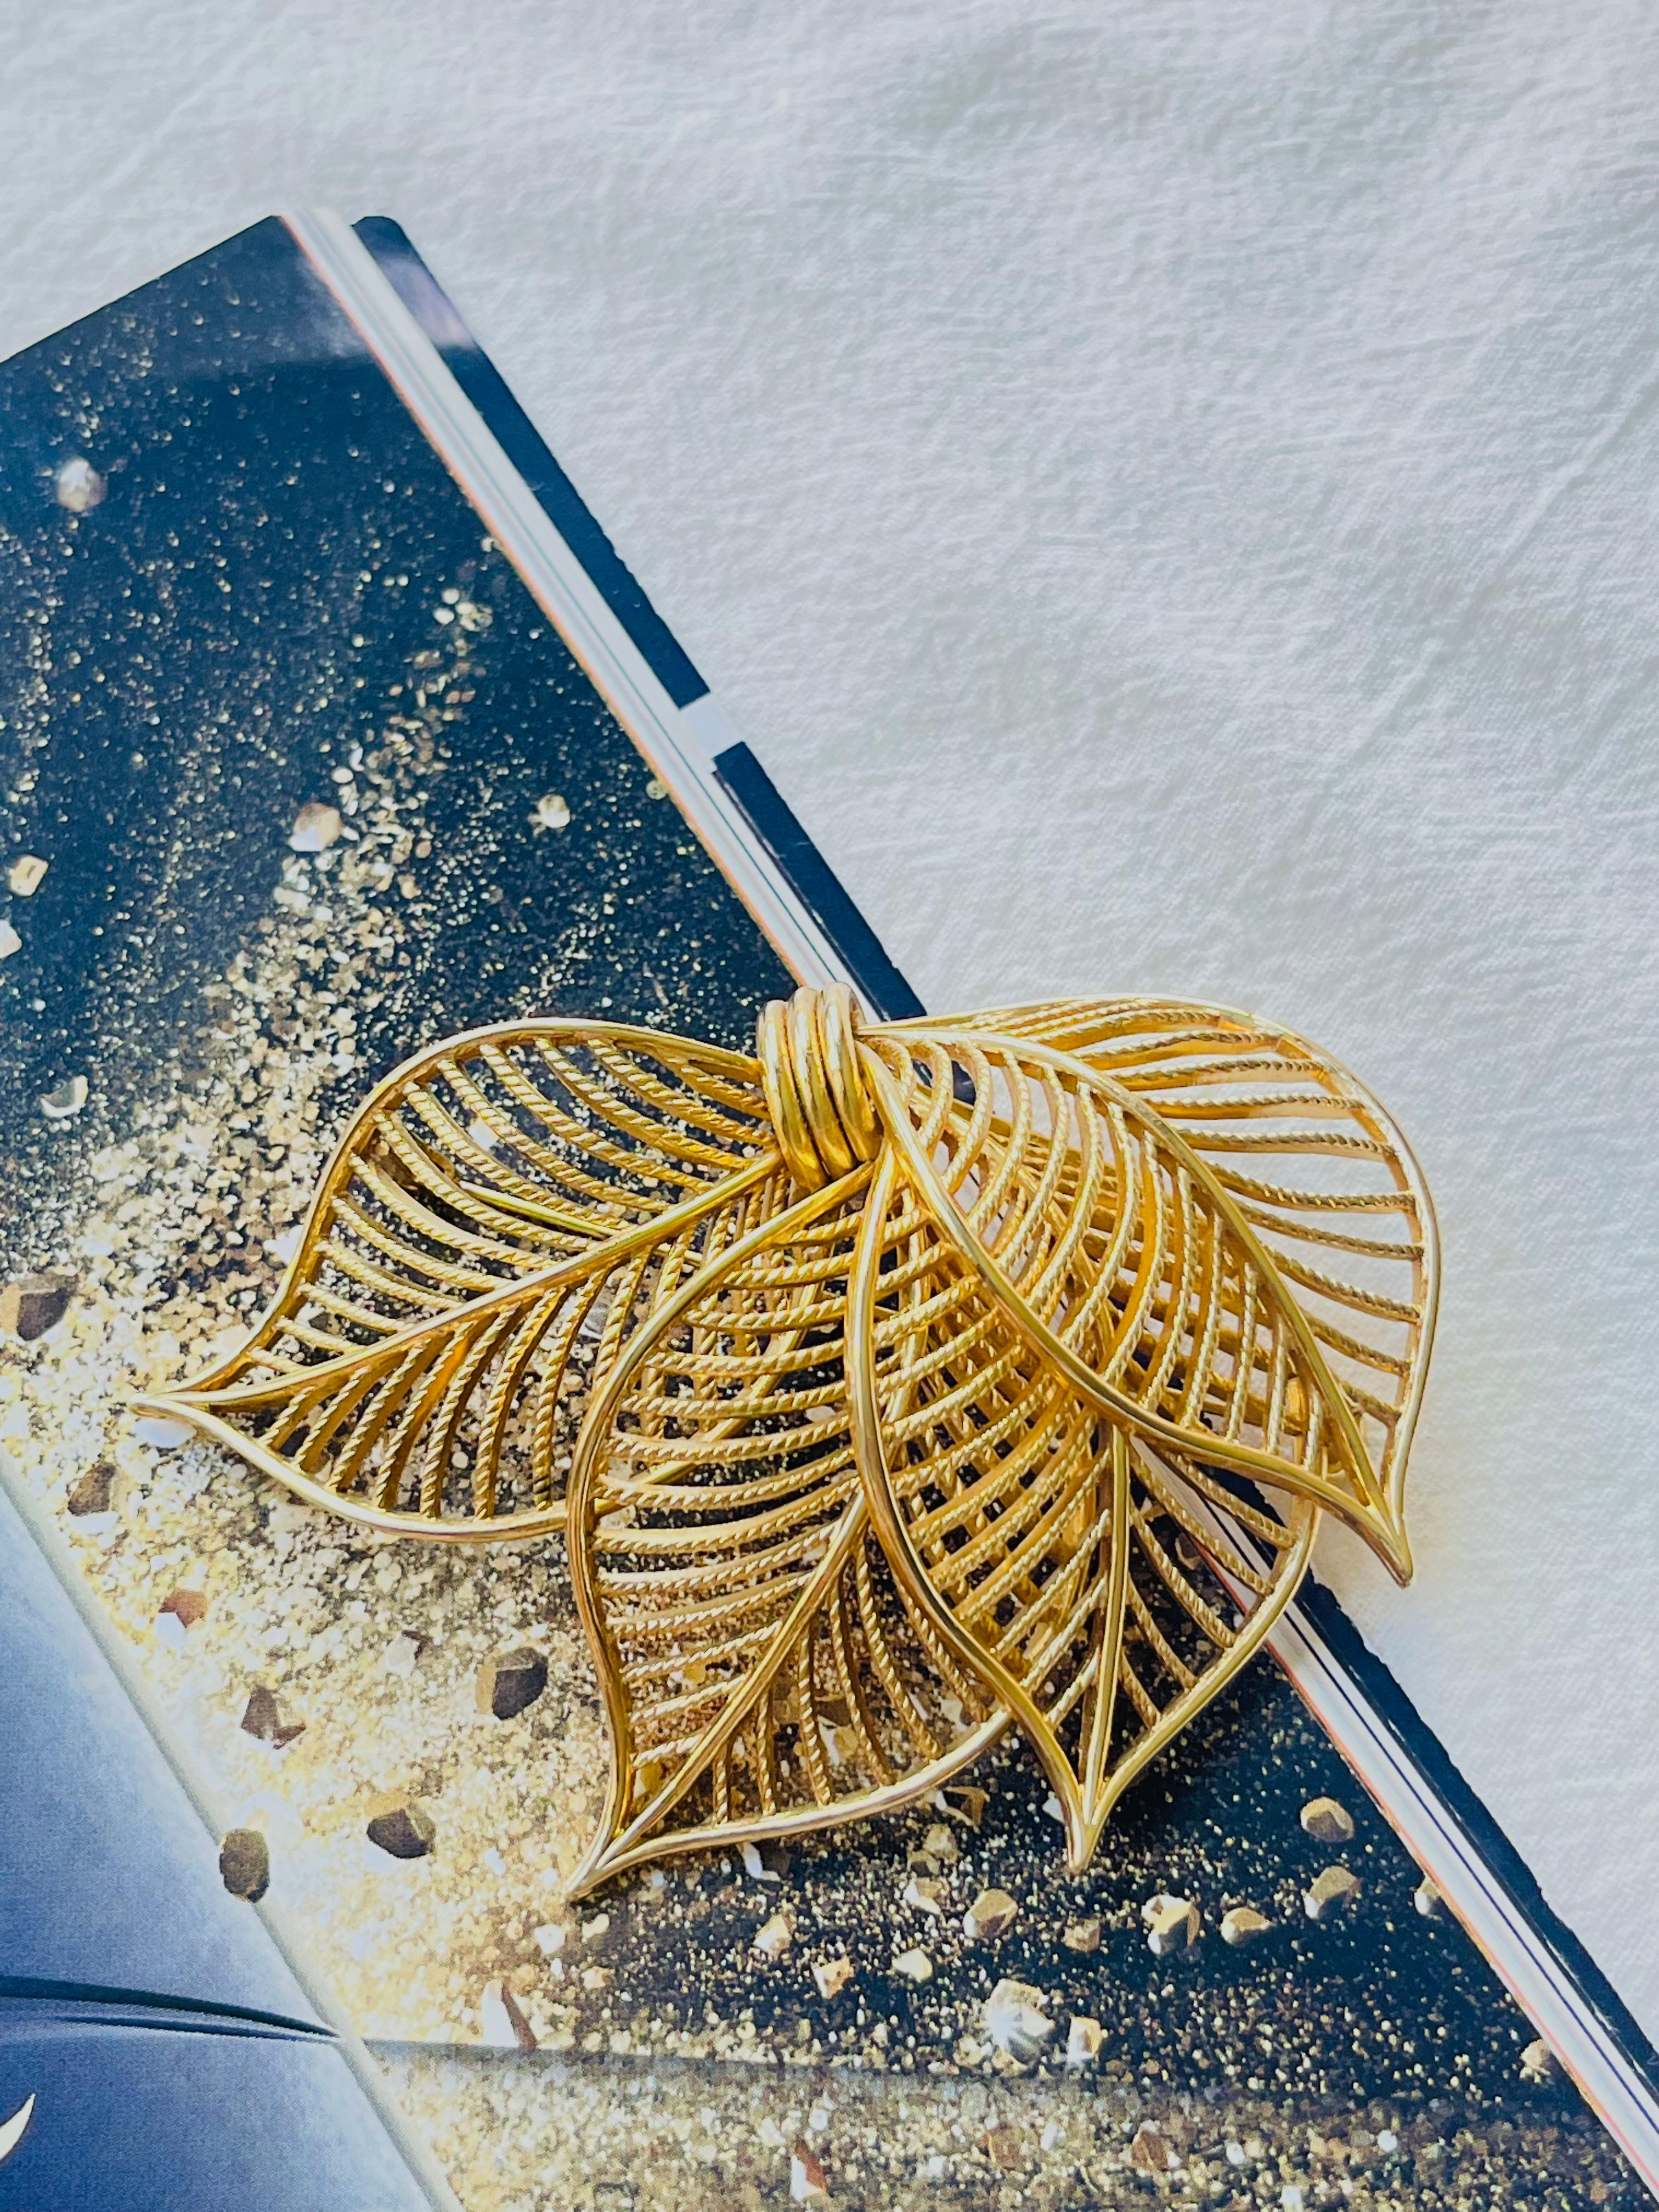 Christian Dior GROSSE 1958 Vintage Extra Large Openwork Four Palm Leaf Brooch In Excellent Condition For Sale In Wokingham, England